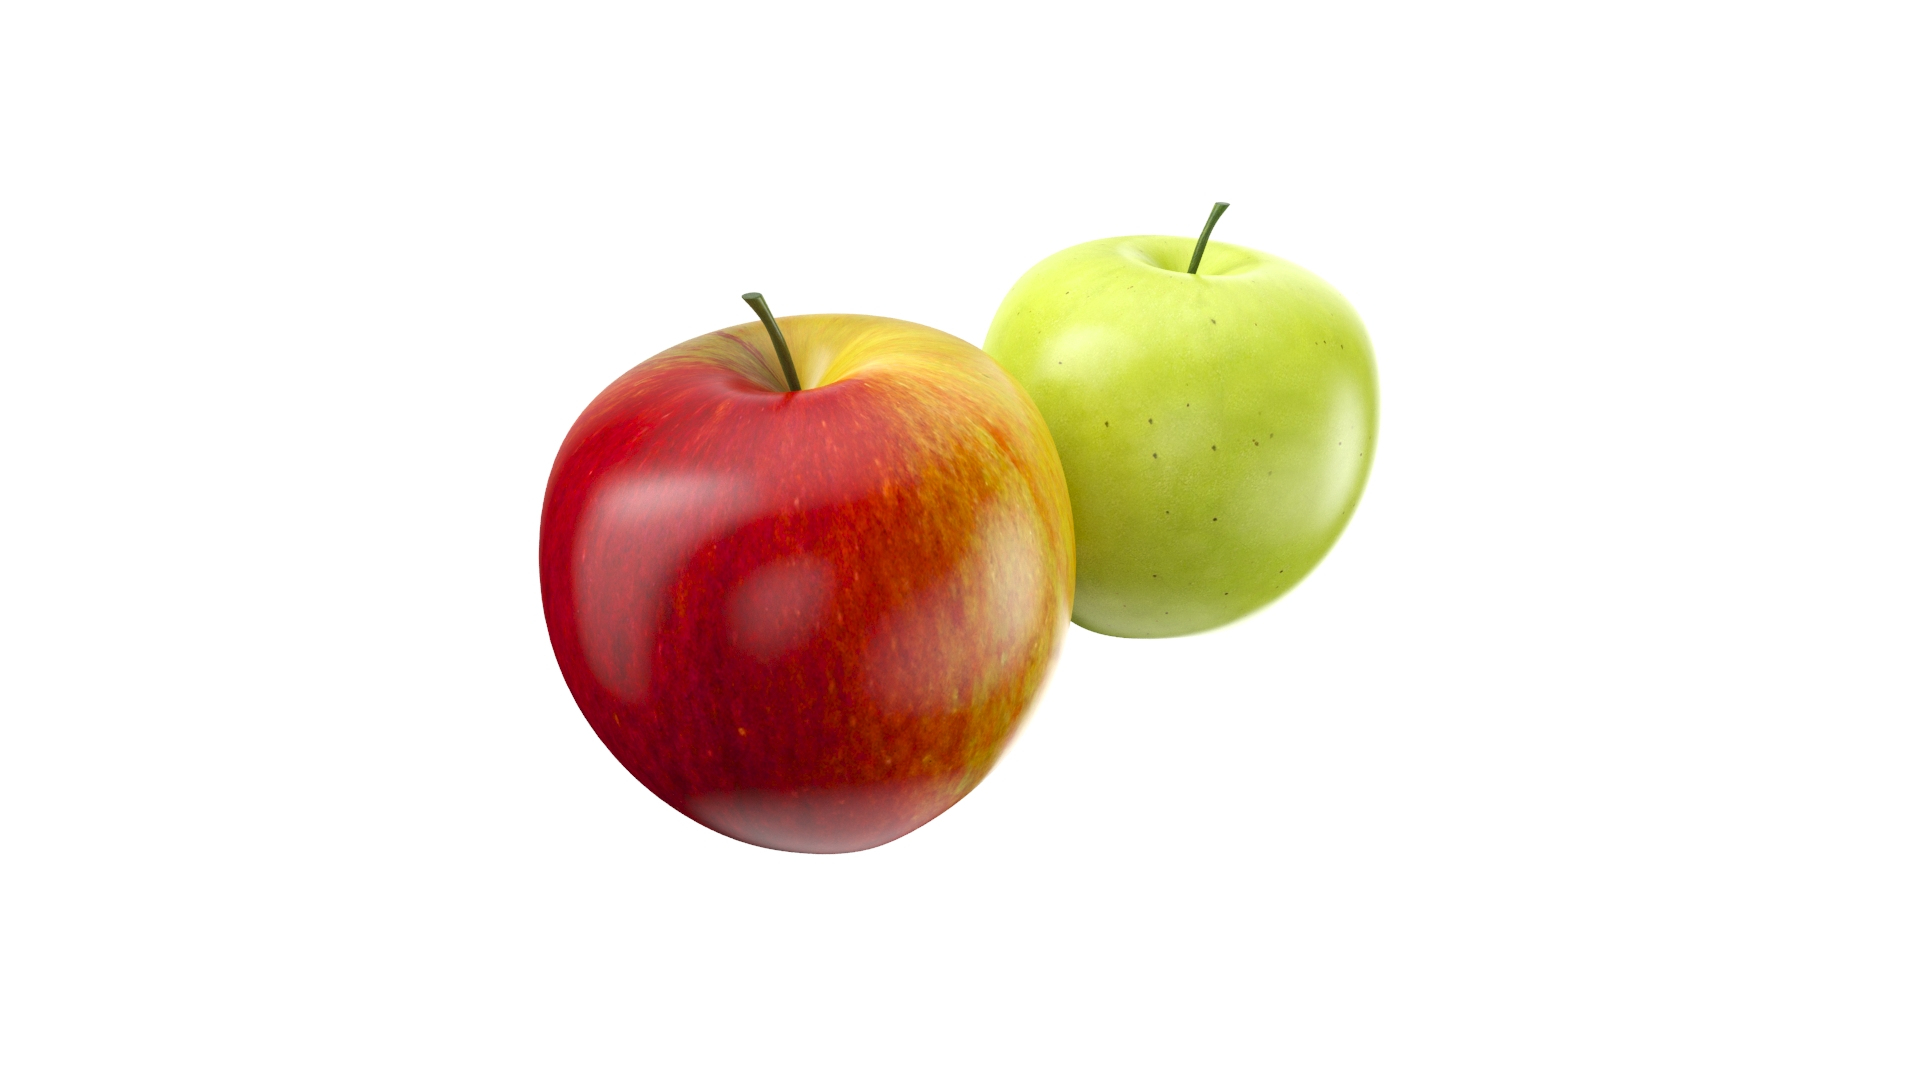 603,739 Red Green Apples Images, Stock Photos, 3D objects, & Vectors